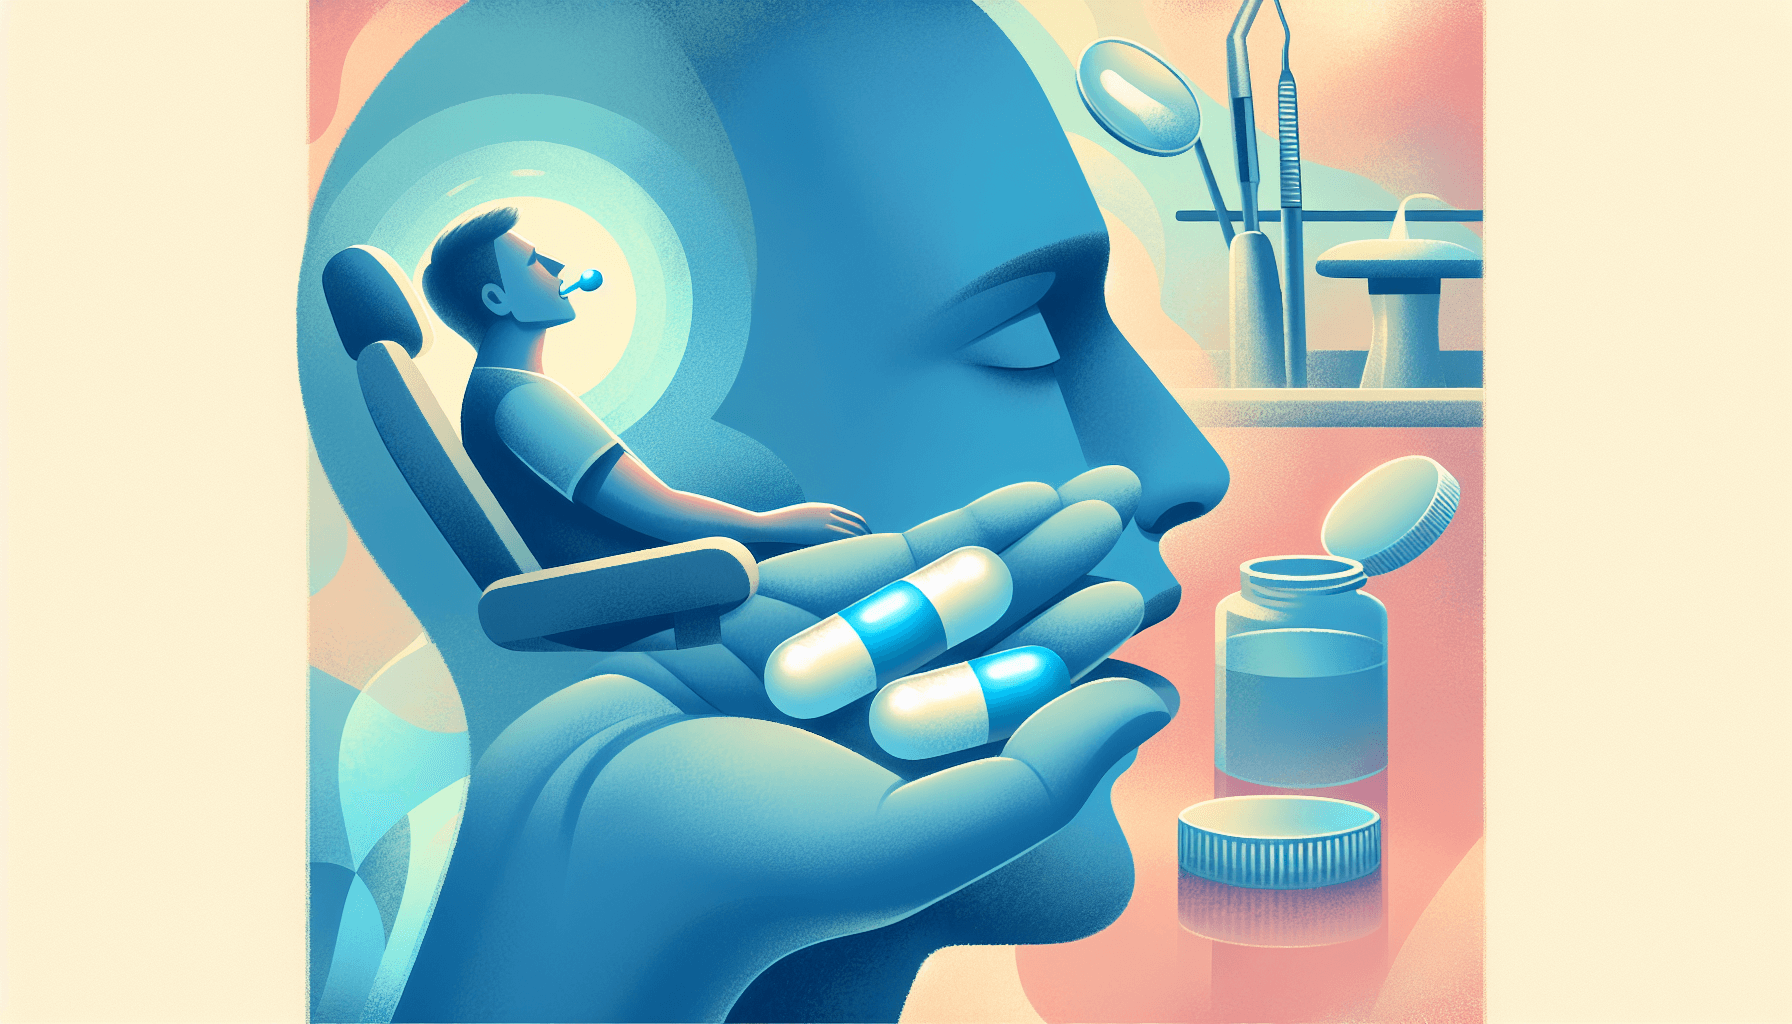 Illustration of a person swallowing sedative pills for oral conscious sedation